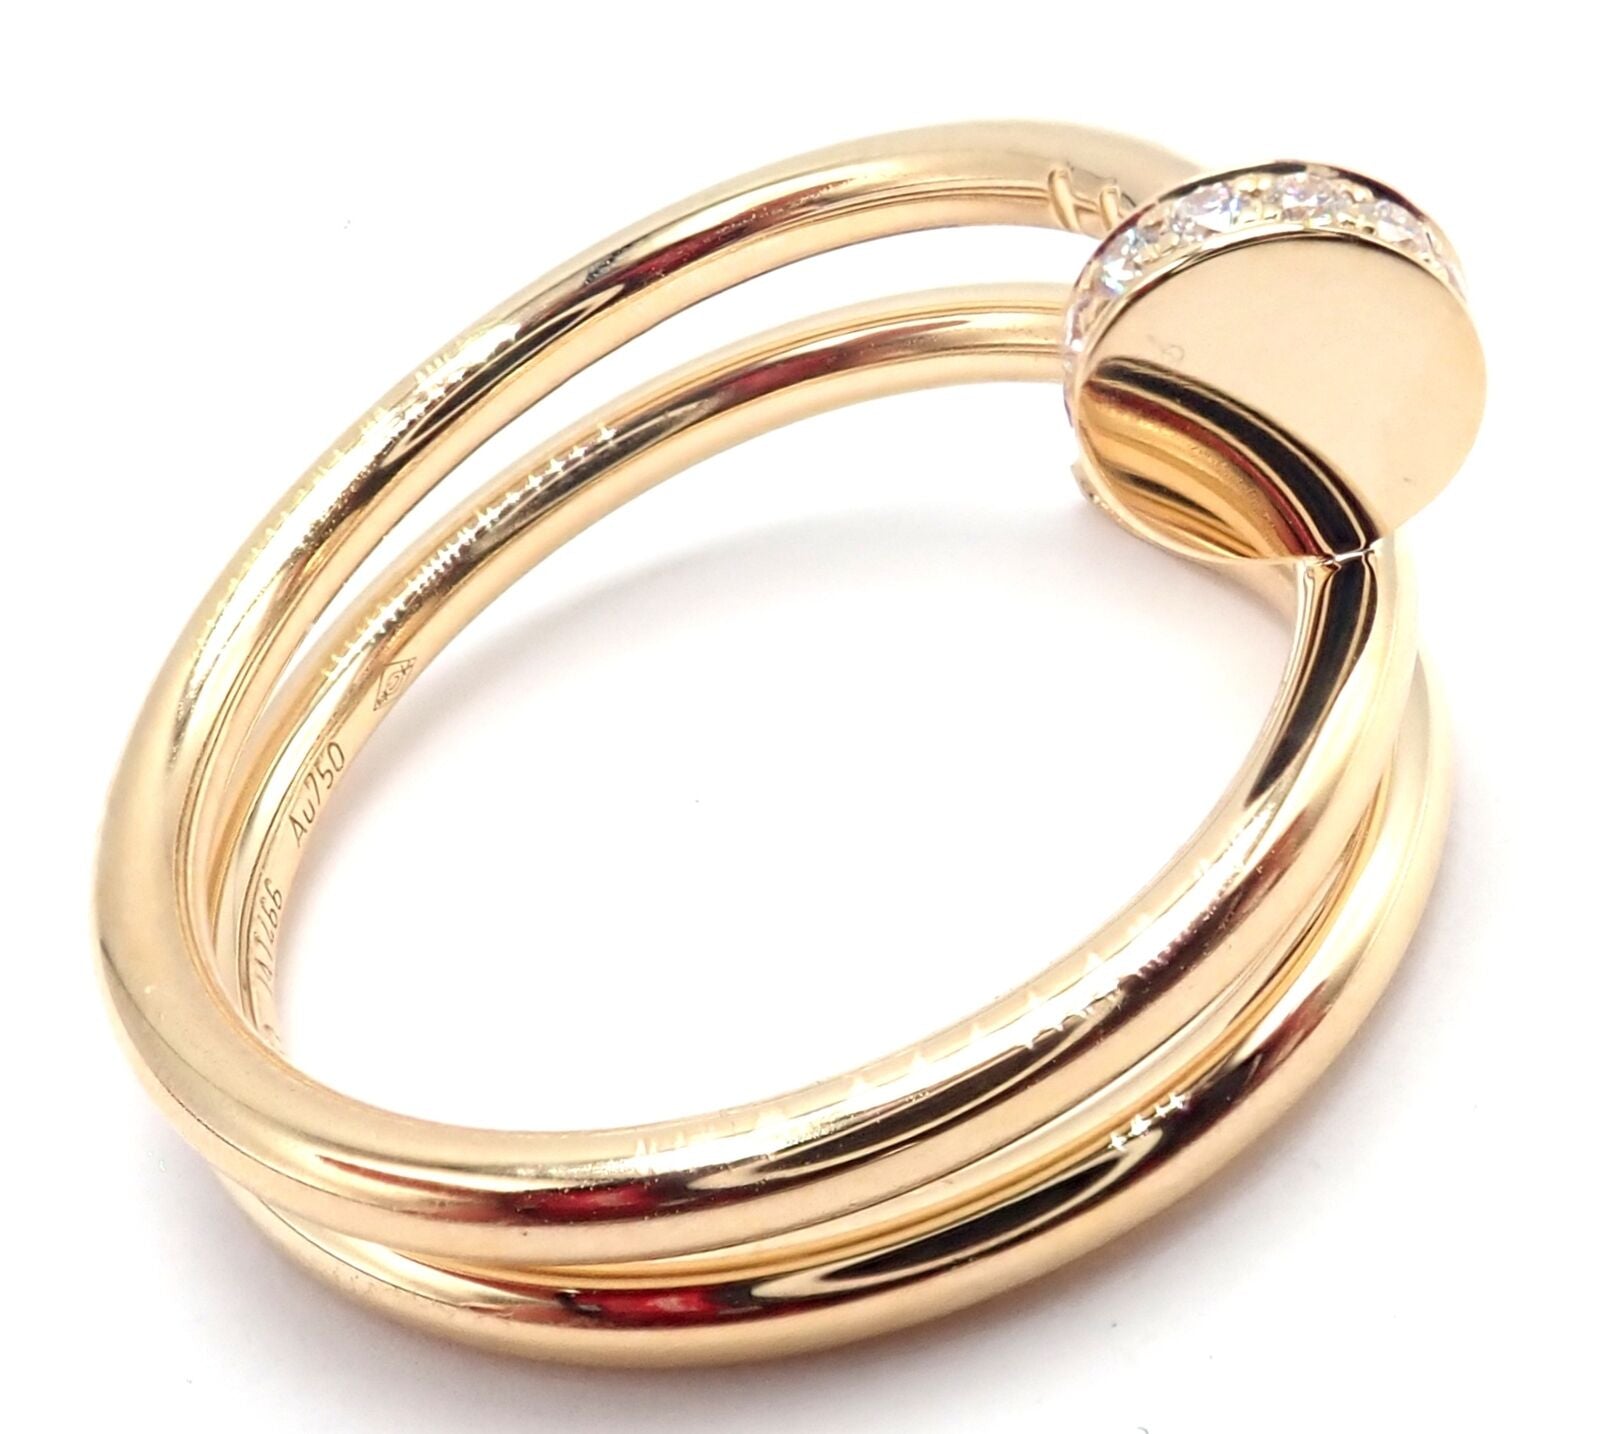 Cartier White Gold and Diamond Juste un Clou Ring | Harrods UK